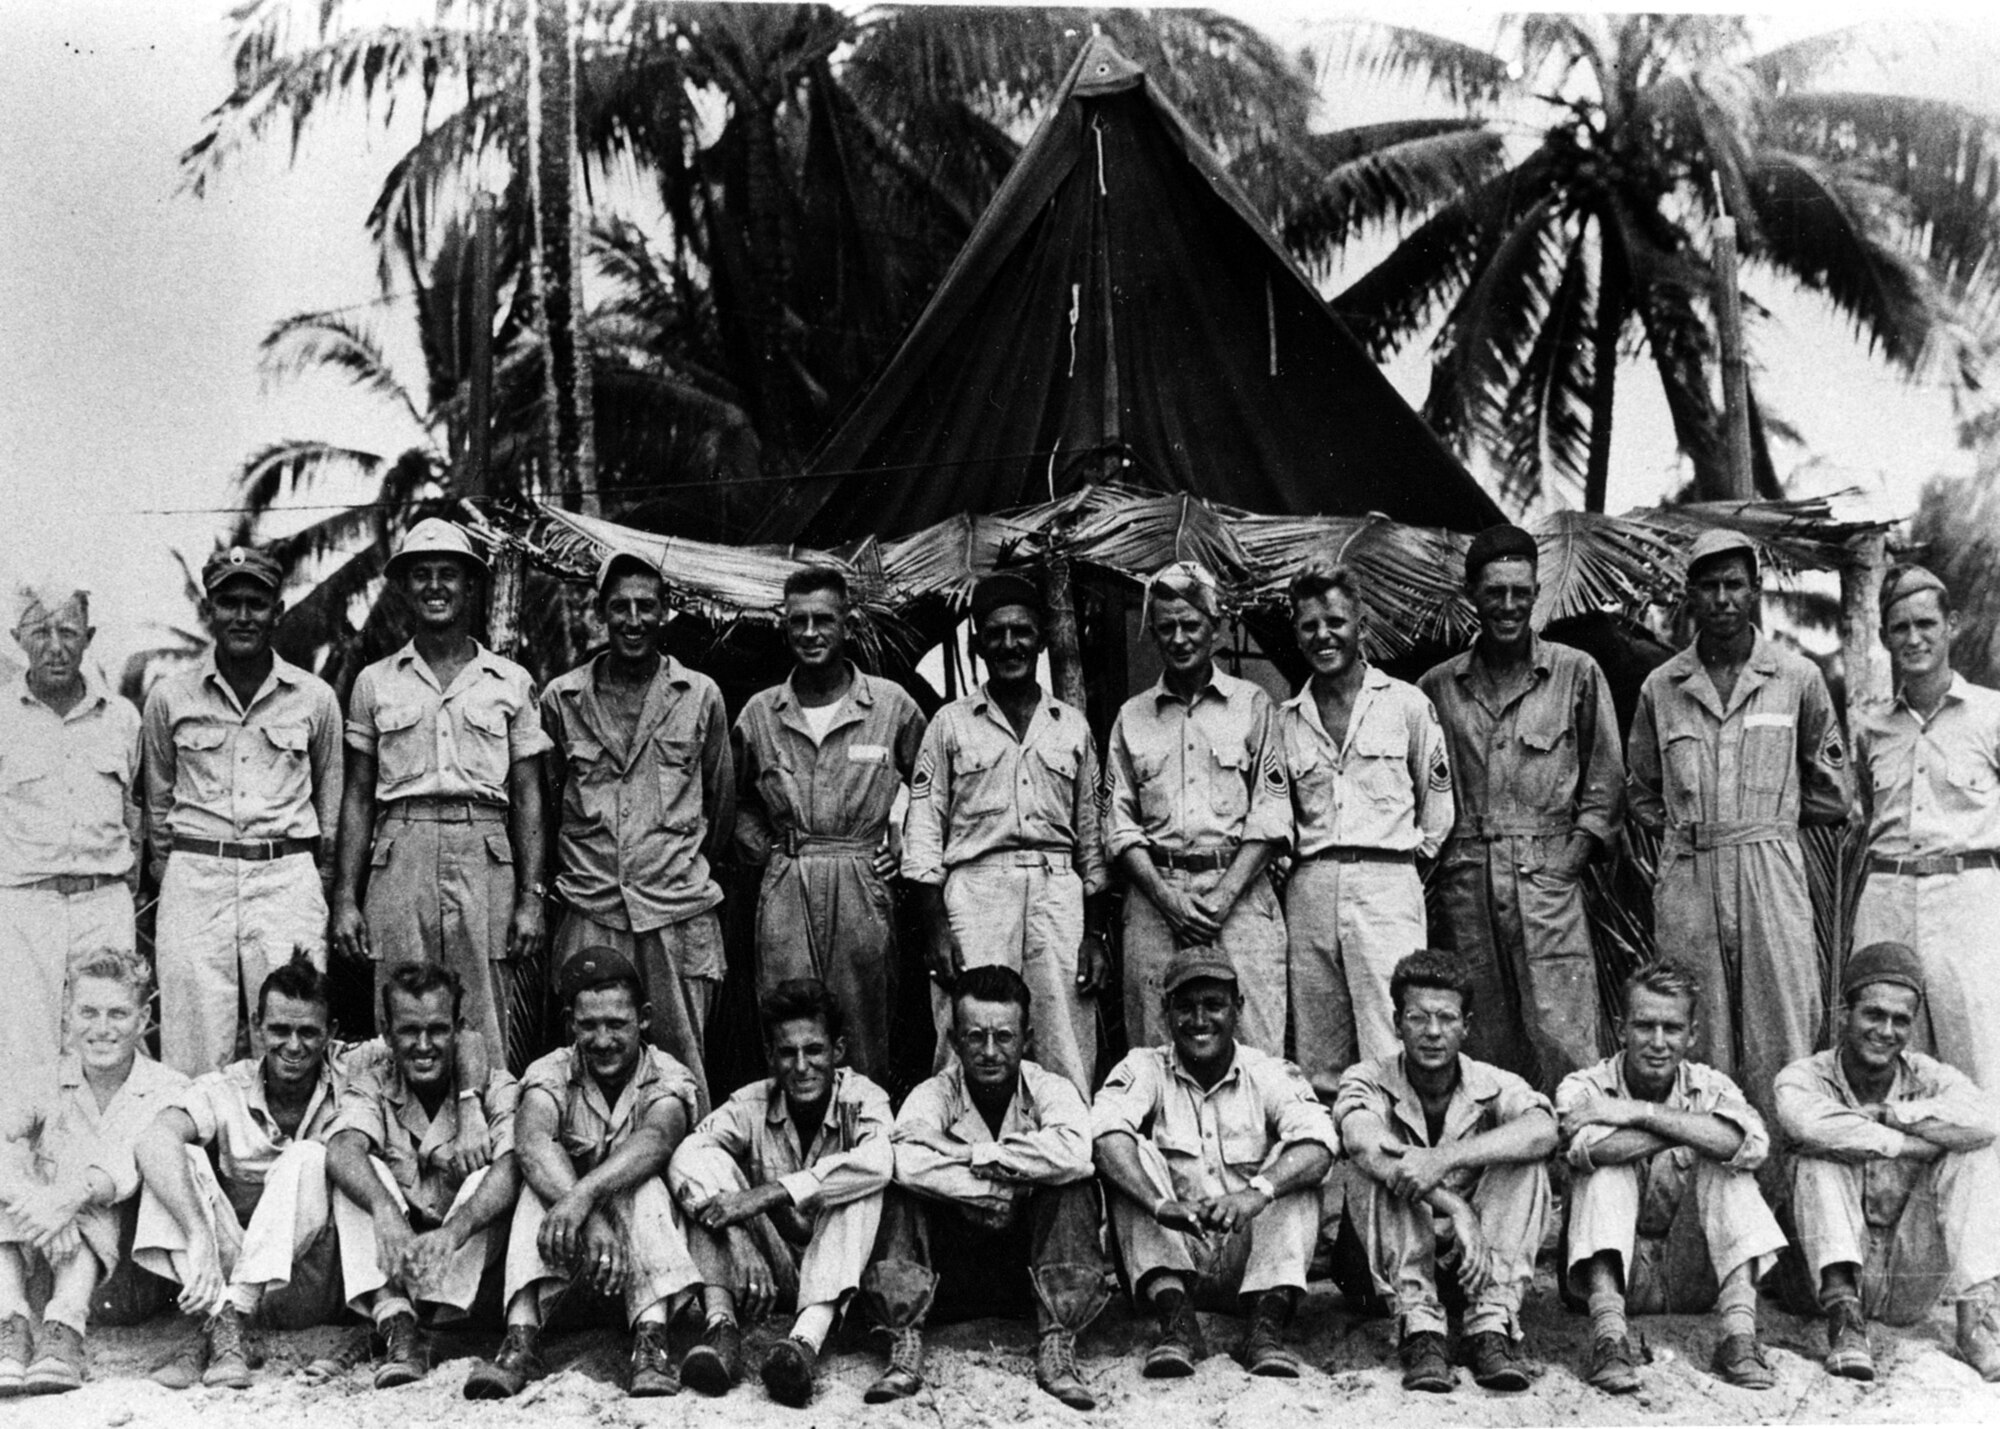 Members of the 110th Reconnaissance Squadron in the Philippines, circa 1942.  (131st Bomb Wing file photo/RELEASED)
